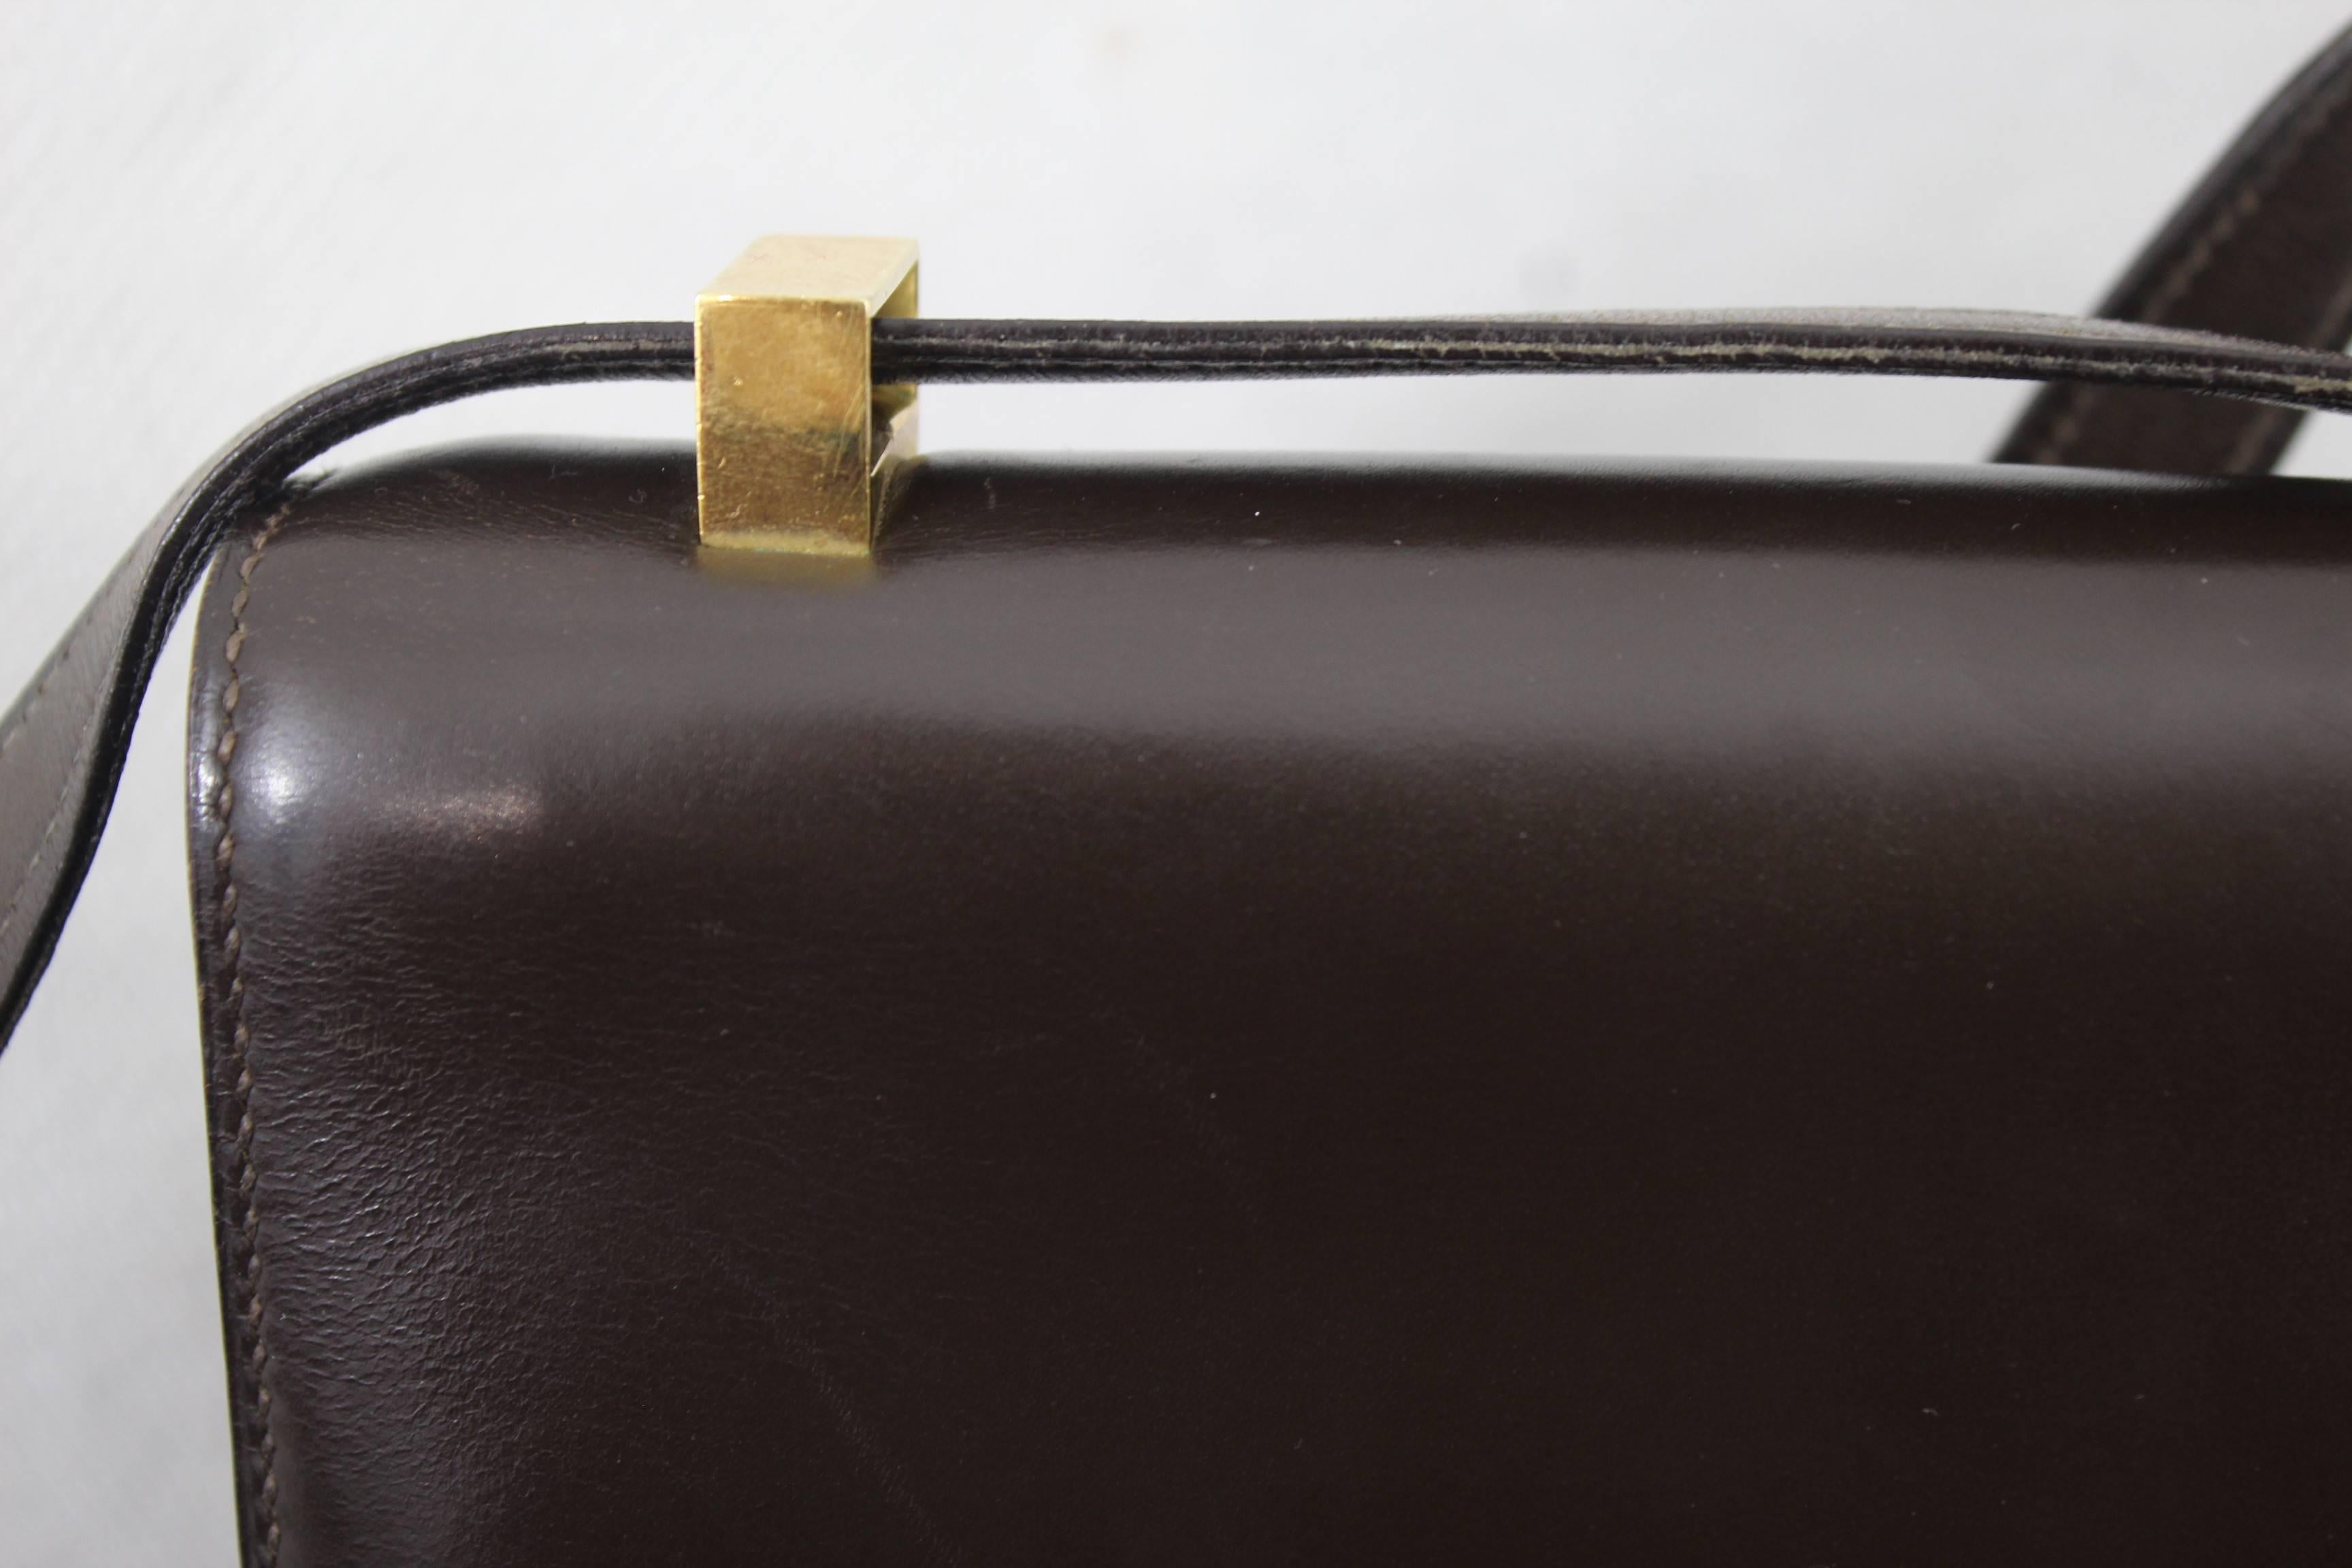 Nice vintage Hermes Constance bag in brown box leathe.

Vintage bag in good vintage coondition, leather not cracked. Soome signs of wear in the hardware.

Bag fom 1972 ( letter B in a circle)

Size 9x6.5 inches

